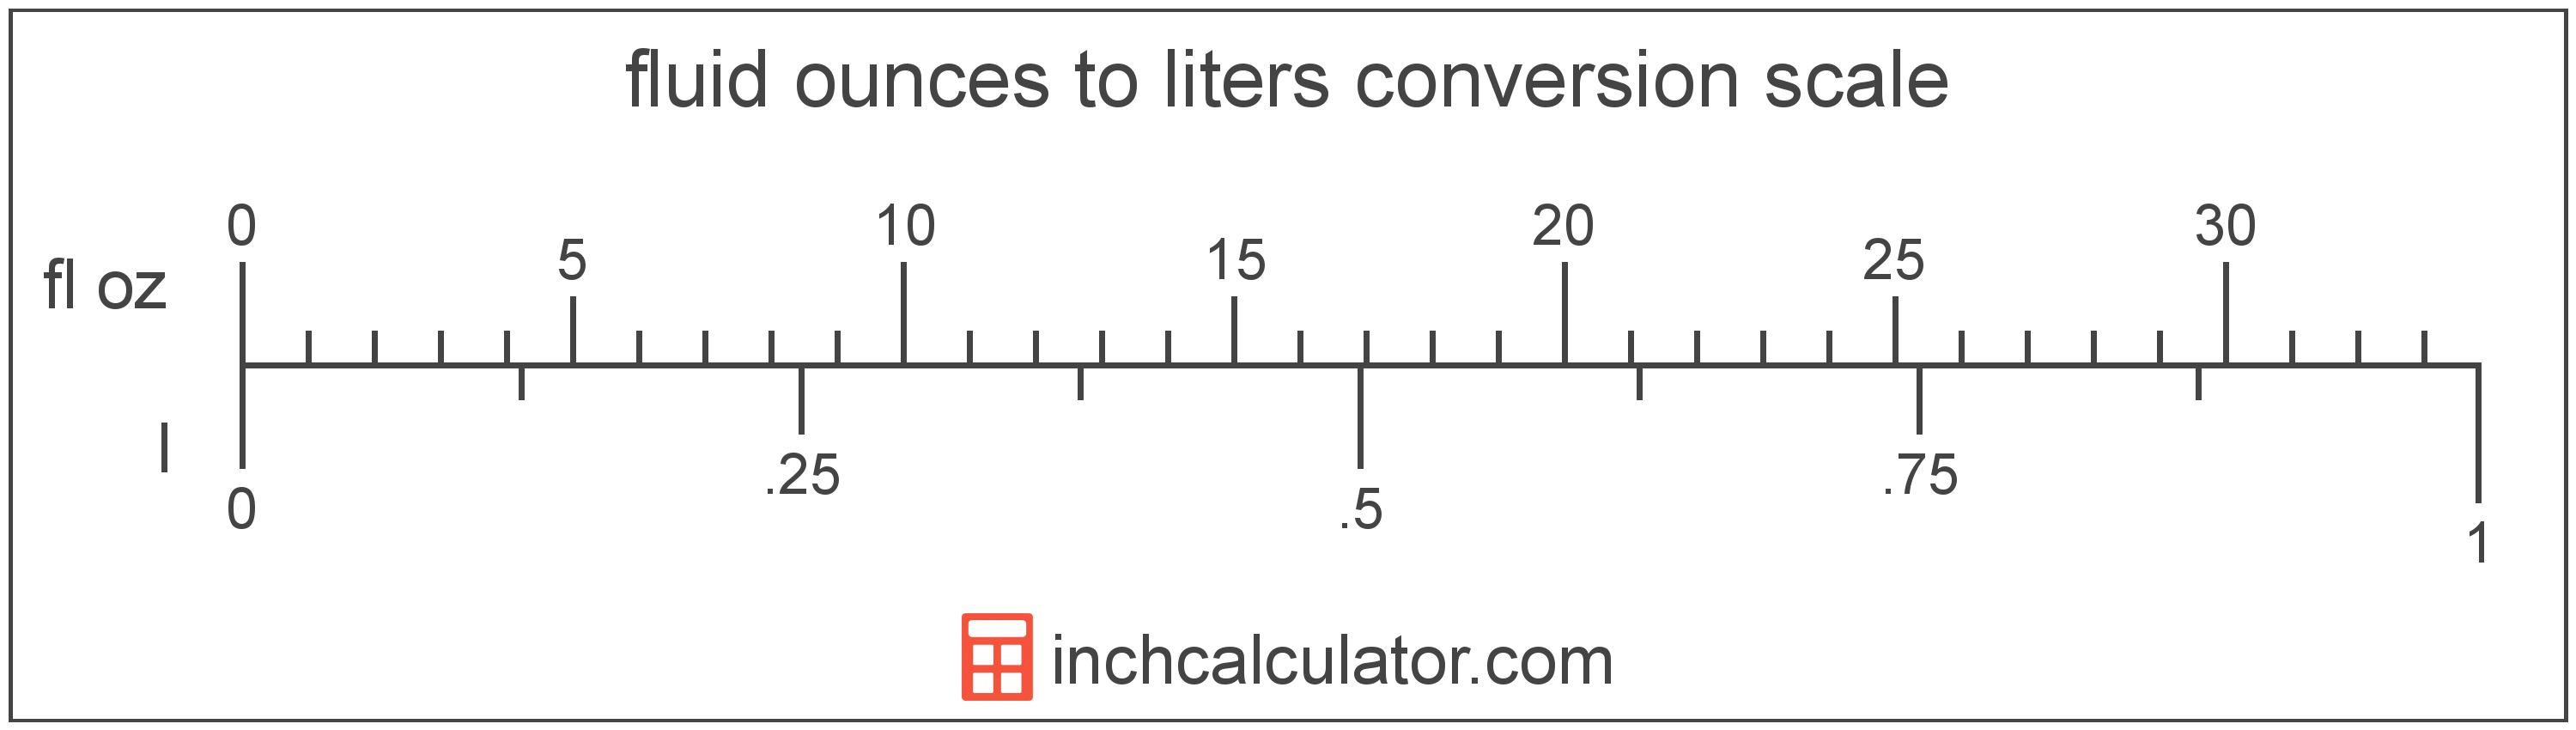 conversion scale showing liters and equivalent fluid ounces volume values